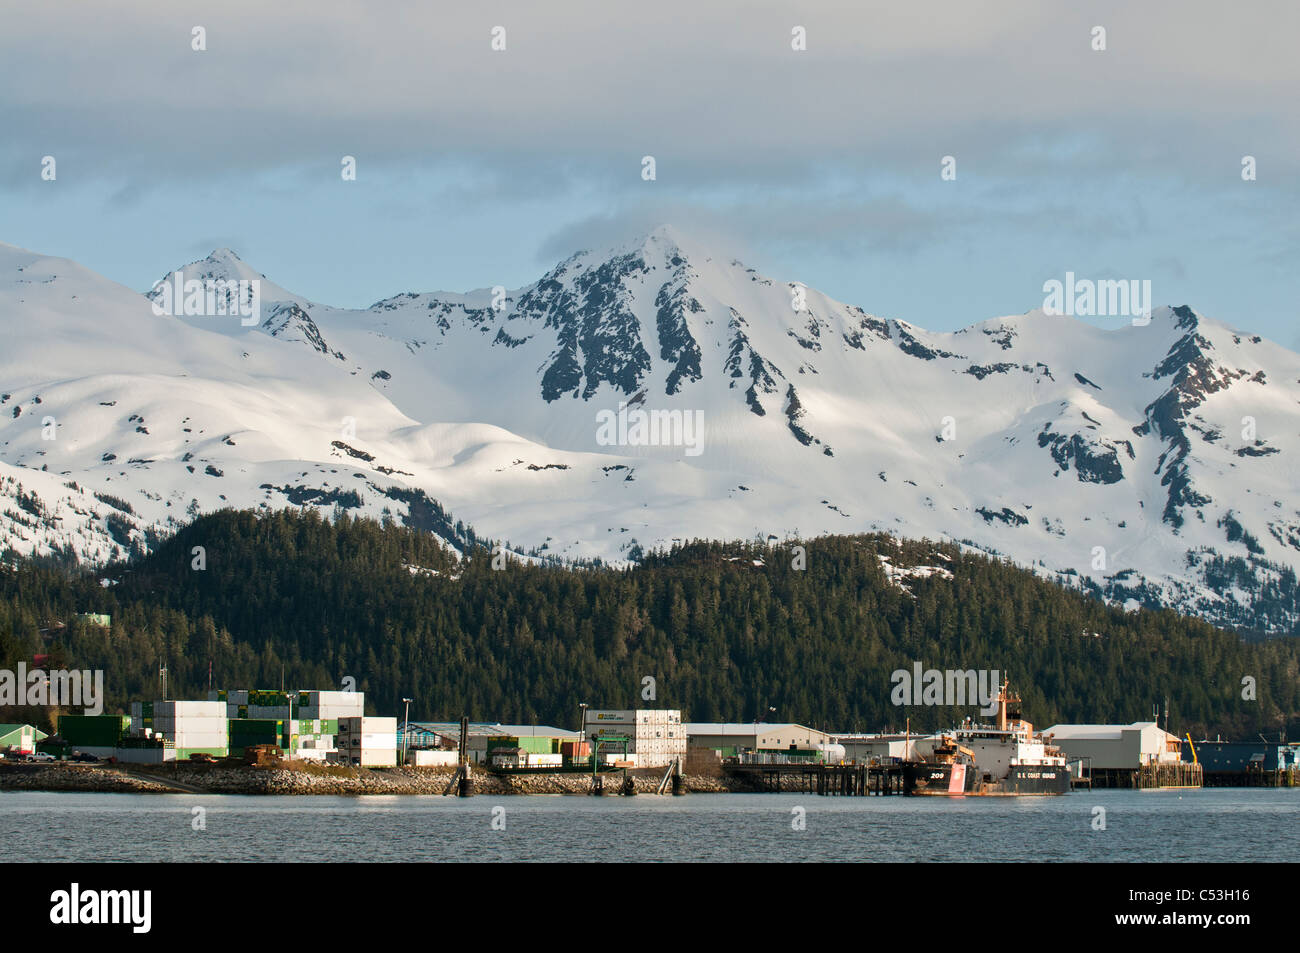 View of the outskirts of Cordova from the M/V Aurora as it pulls into the Orca Inlet, Prince William Sound, Alaska, Spring Stock Photo